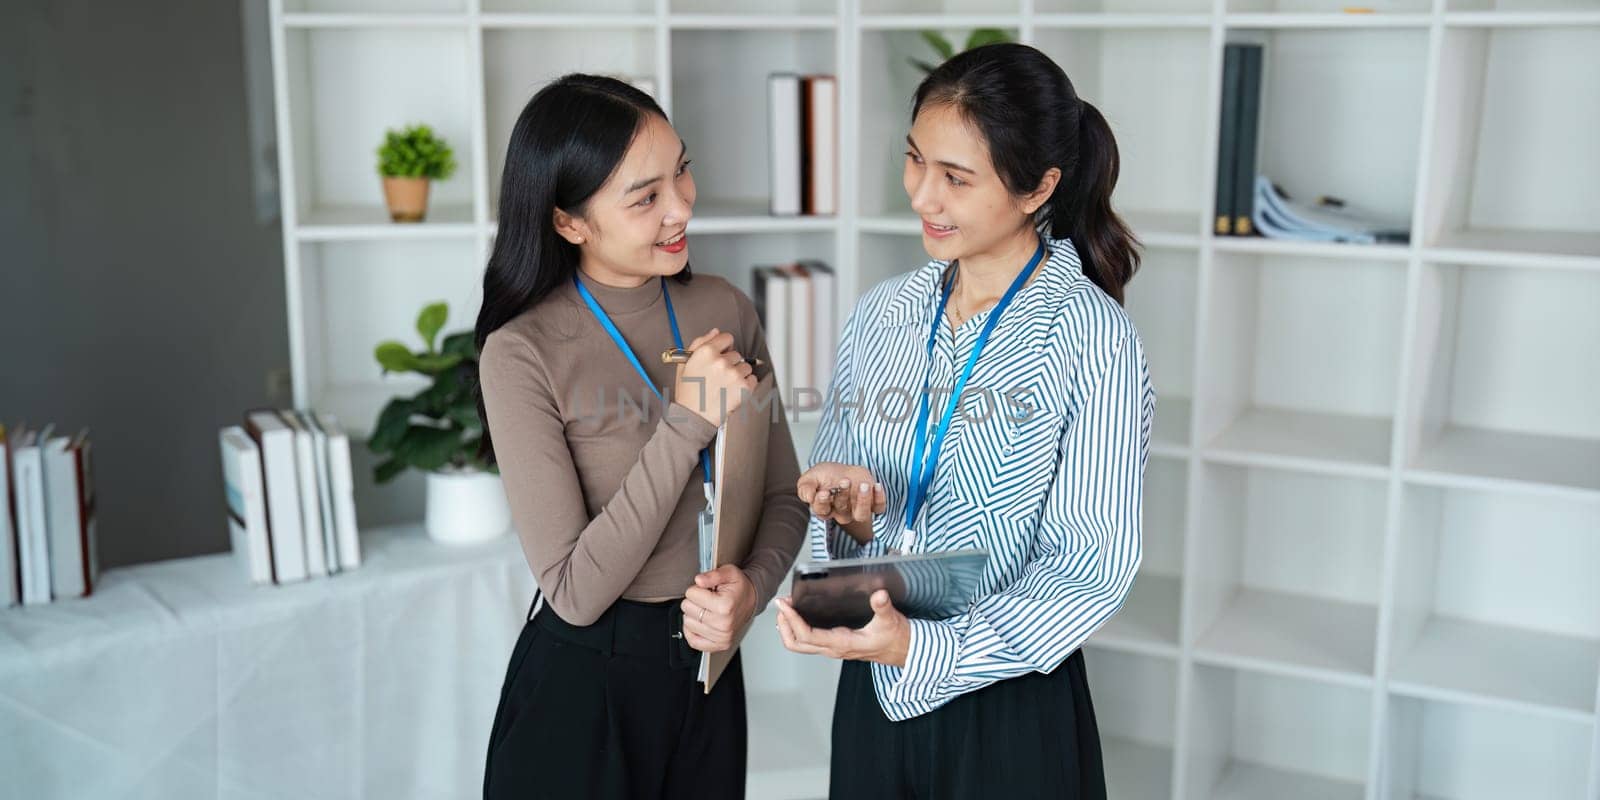 businesspeople woman professionals working in office, Colleagues using digital tablet in coworking, coworkers working together in boardroom, brainstorming, discussing and analyzing business strategy by itchaznong